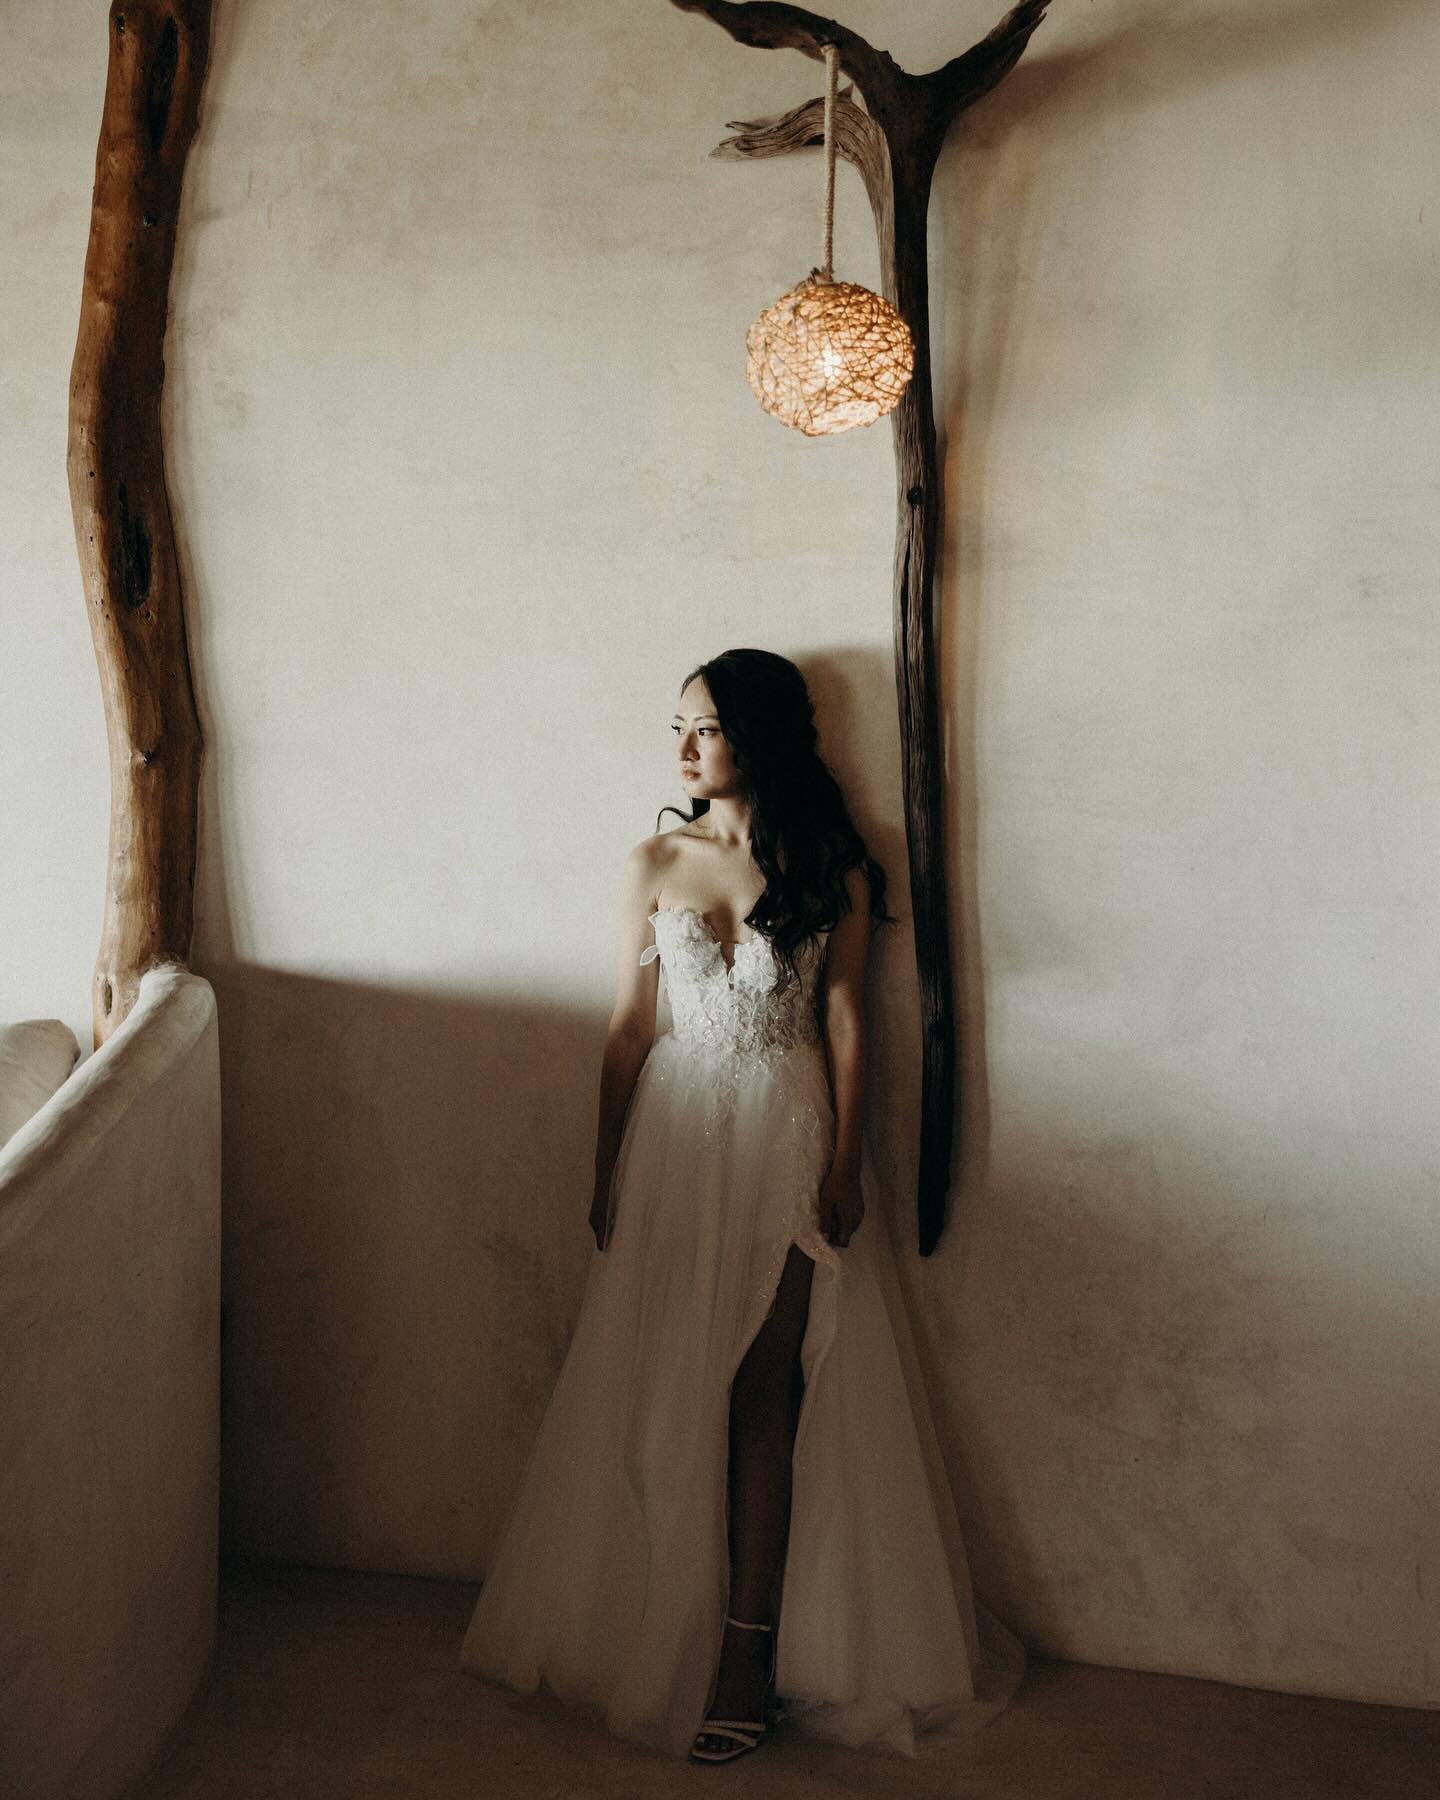 Jia and her dress. @jialee1120 

I always like to visit with brides during their preparation. I can feel that emotion as they begin to realize that it&rsquo;s finally their day. Their nerves are on edge and when I walk into their rooms I can feel tha